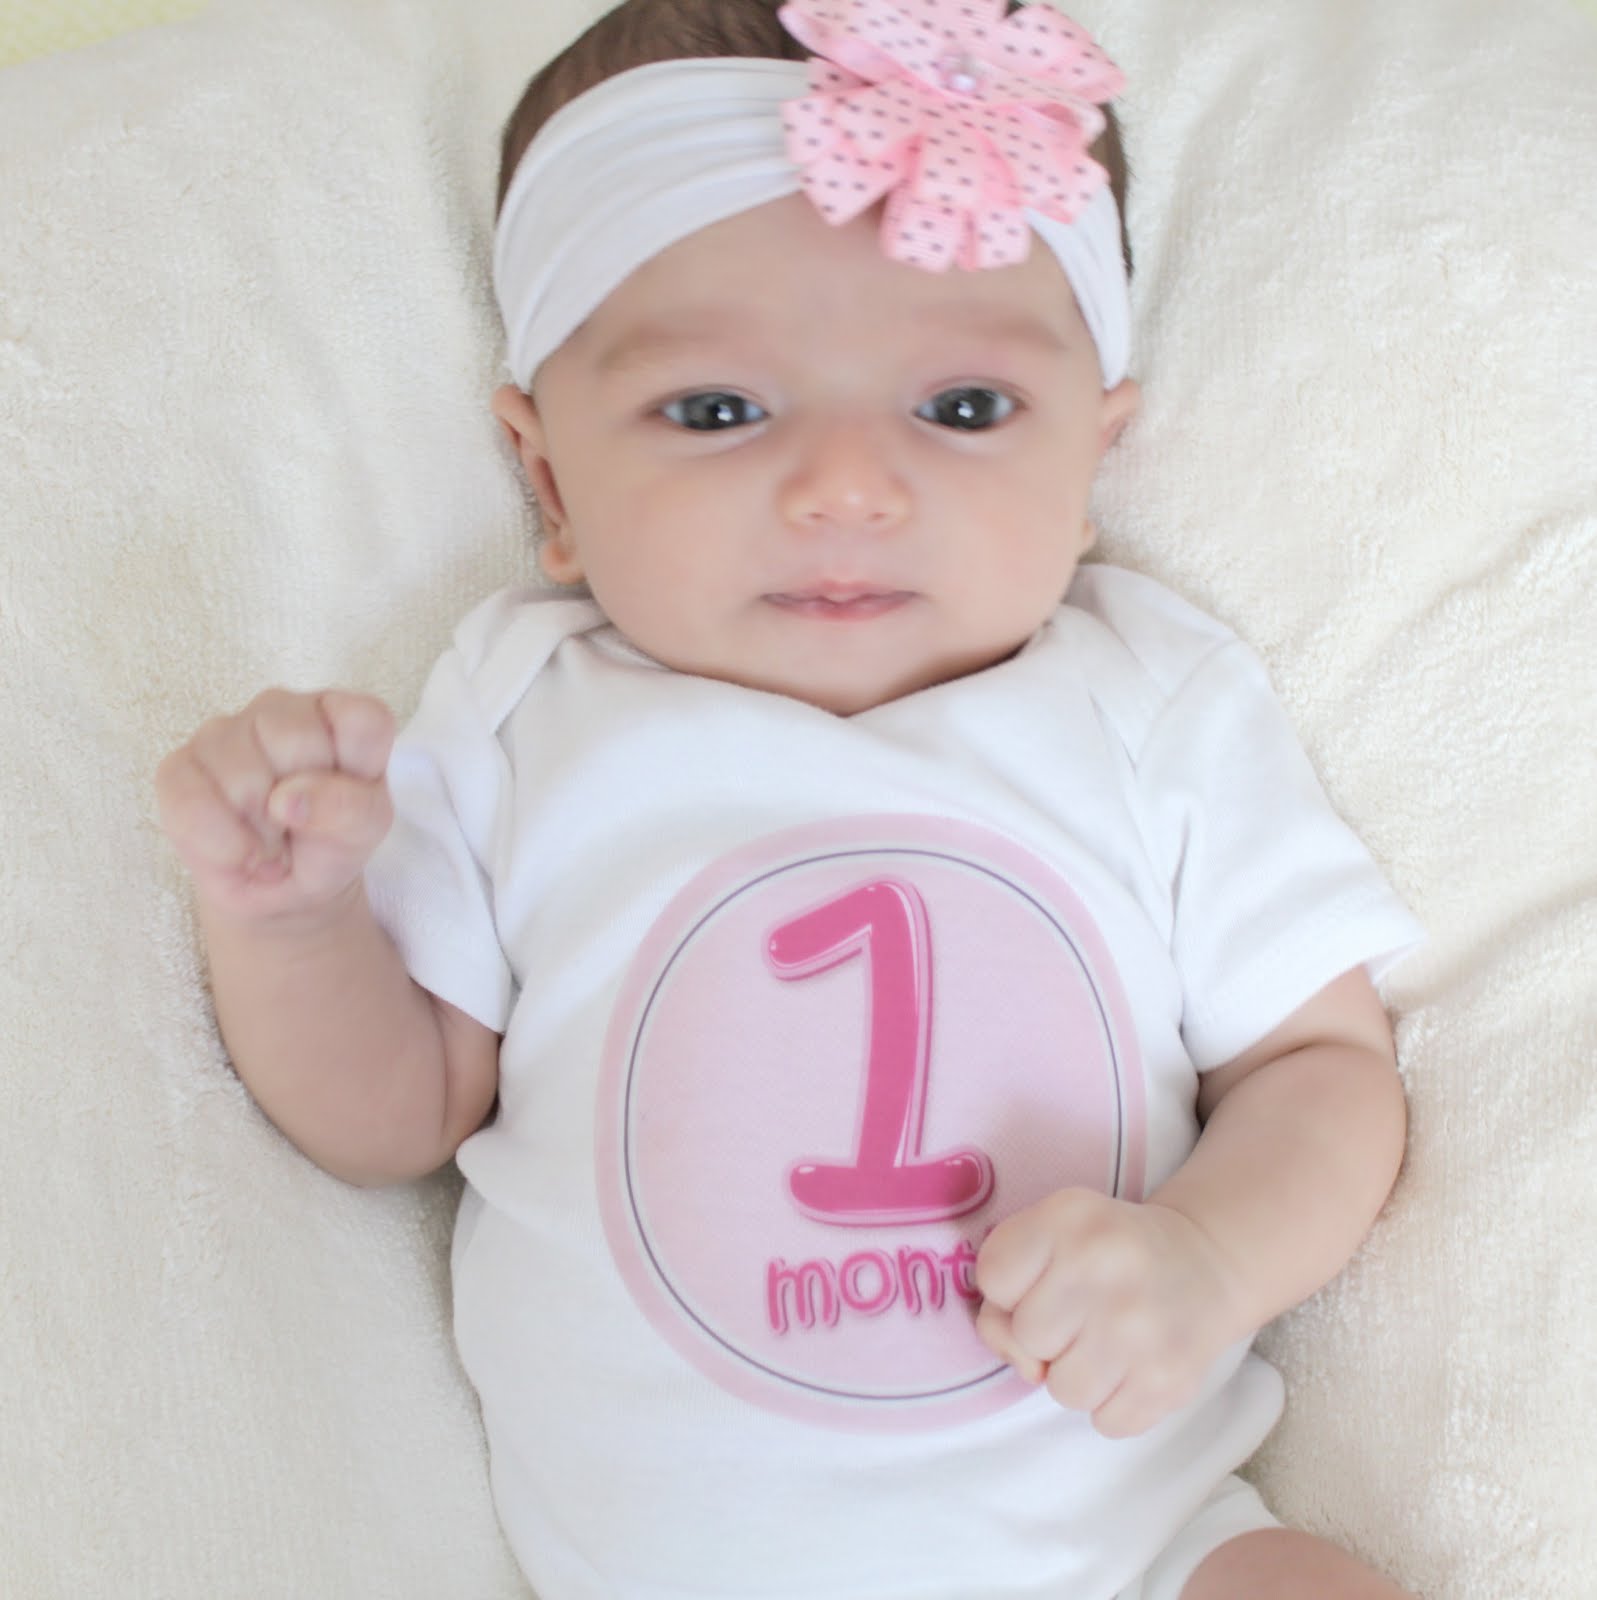 a baby at 1 month